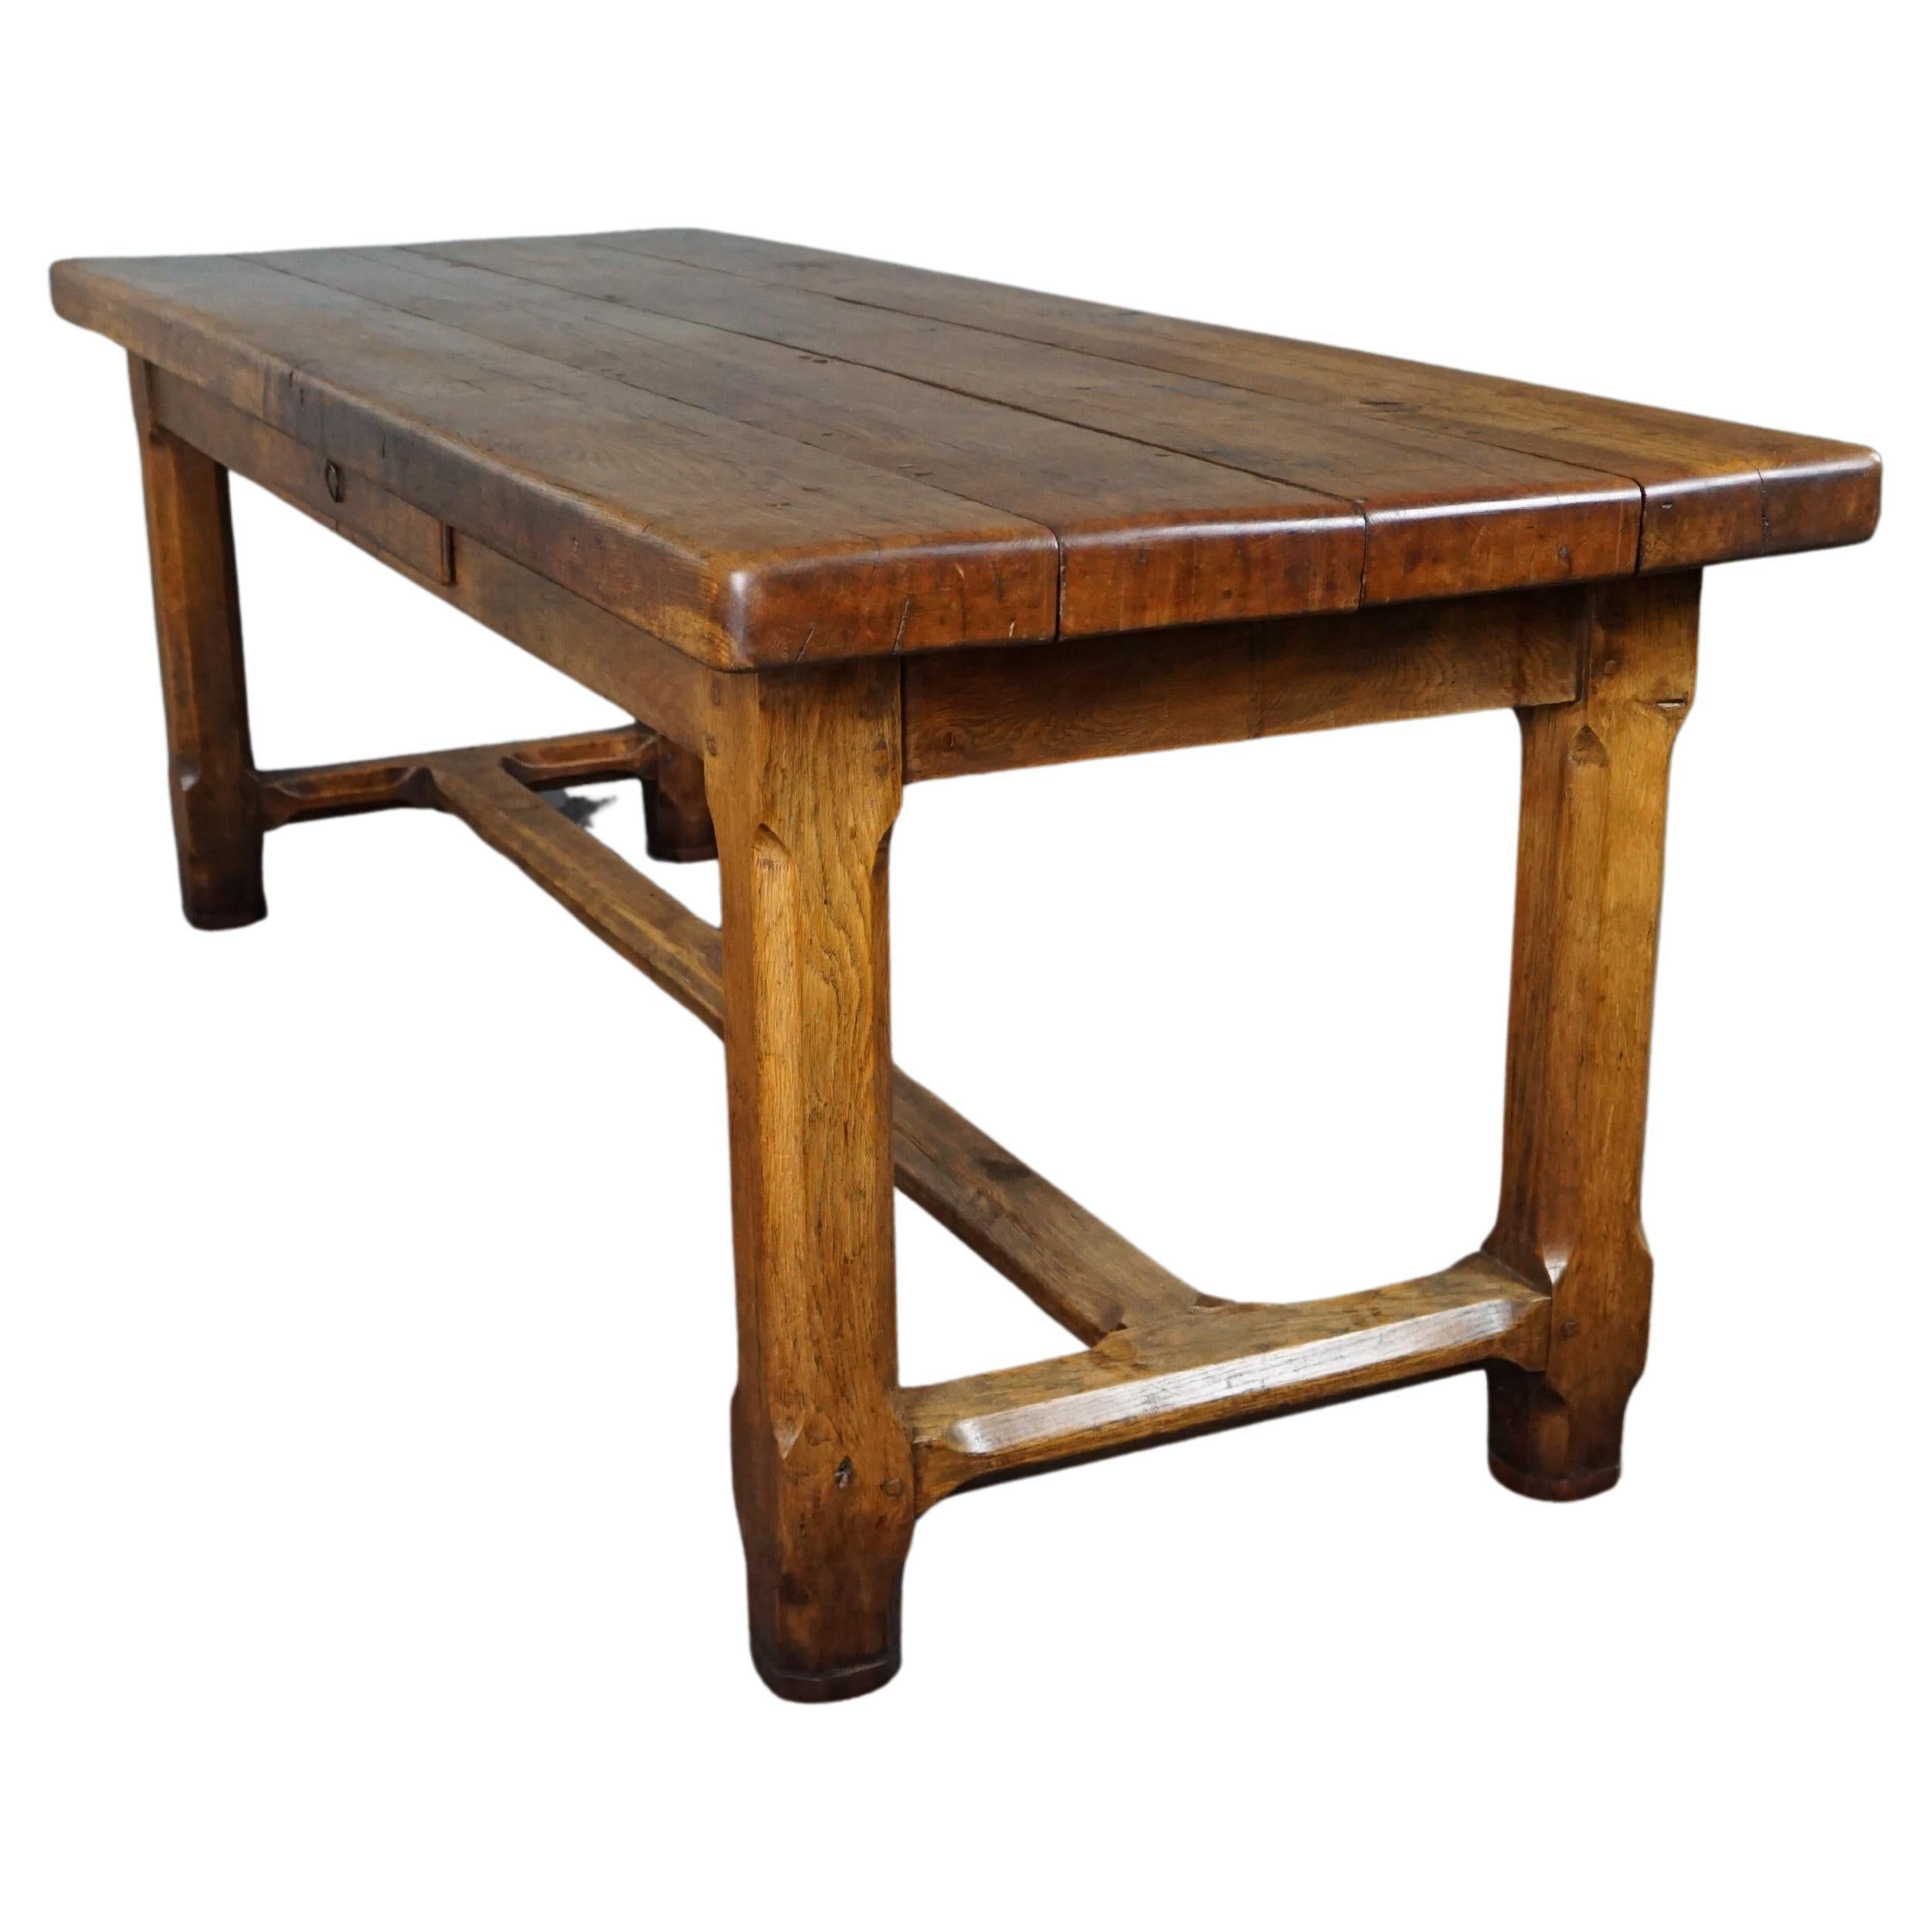 Incredible early 19th-century French thick and solid oak antique dining table